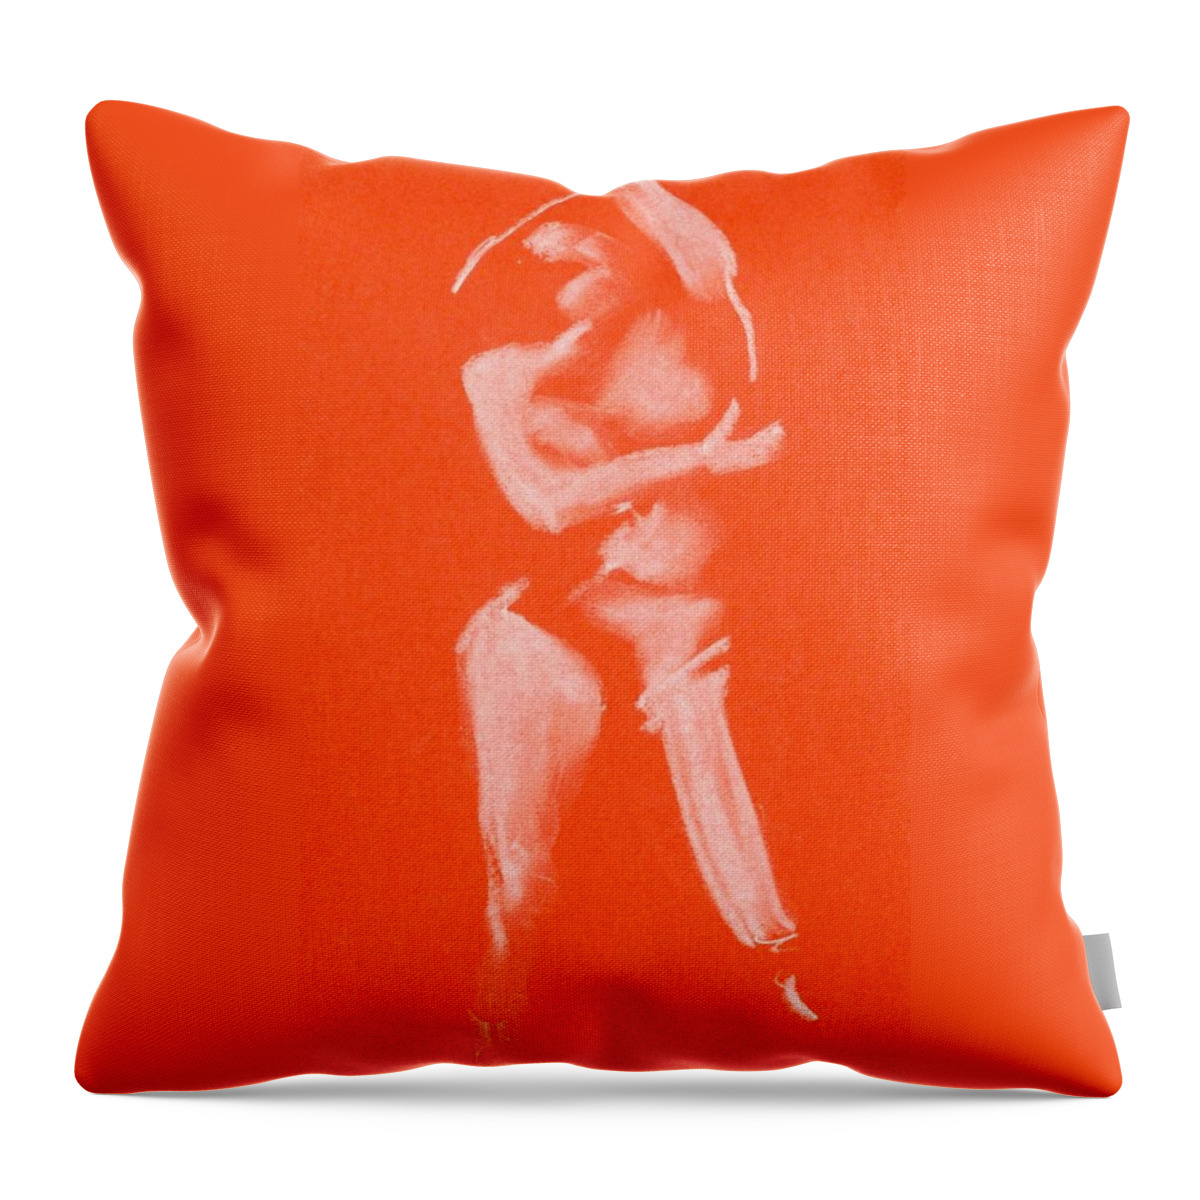 Nude Throw Pillow featuring the drawing Over Head Ovan Huvud by Marica Ohlsson